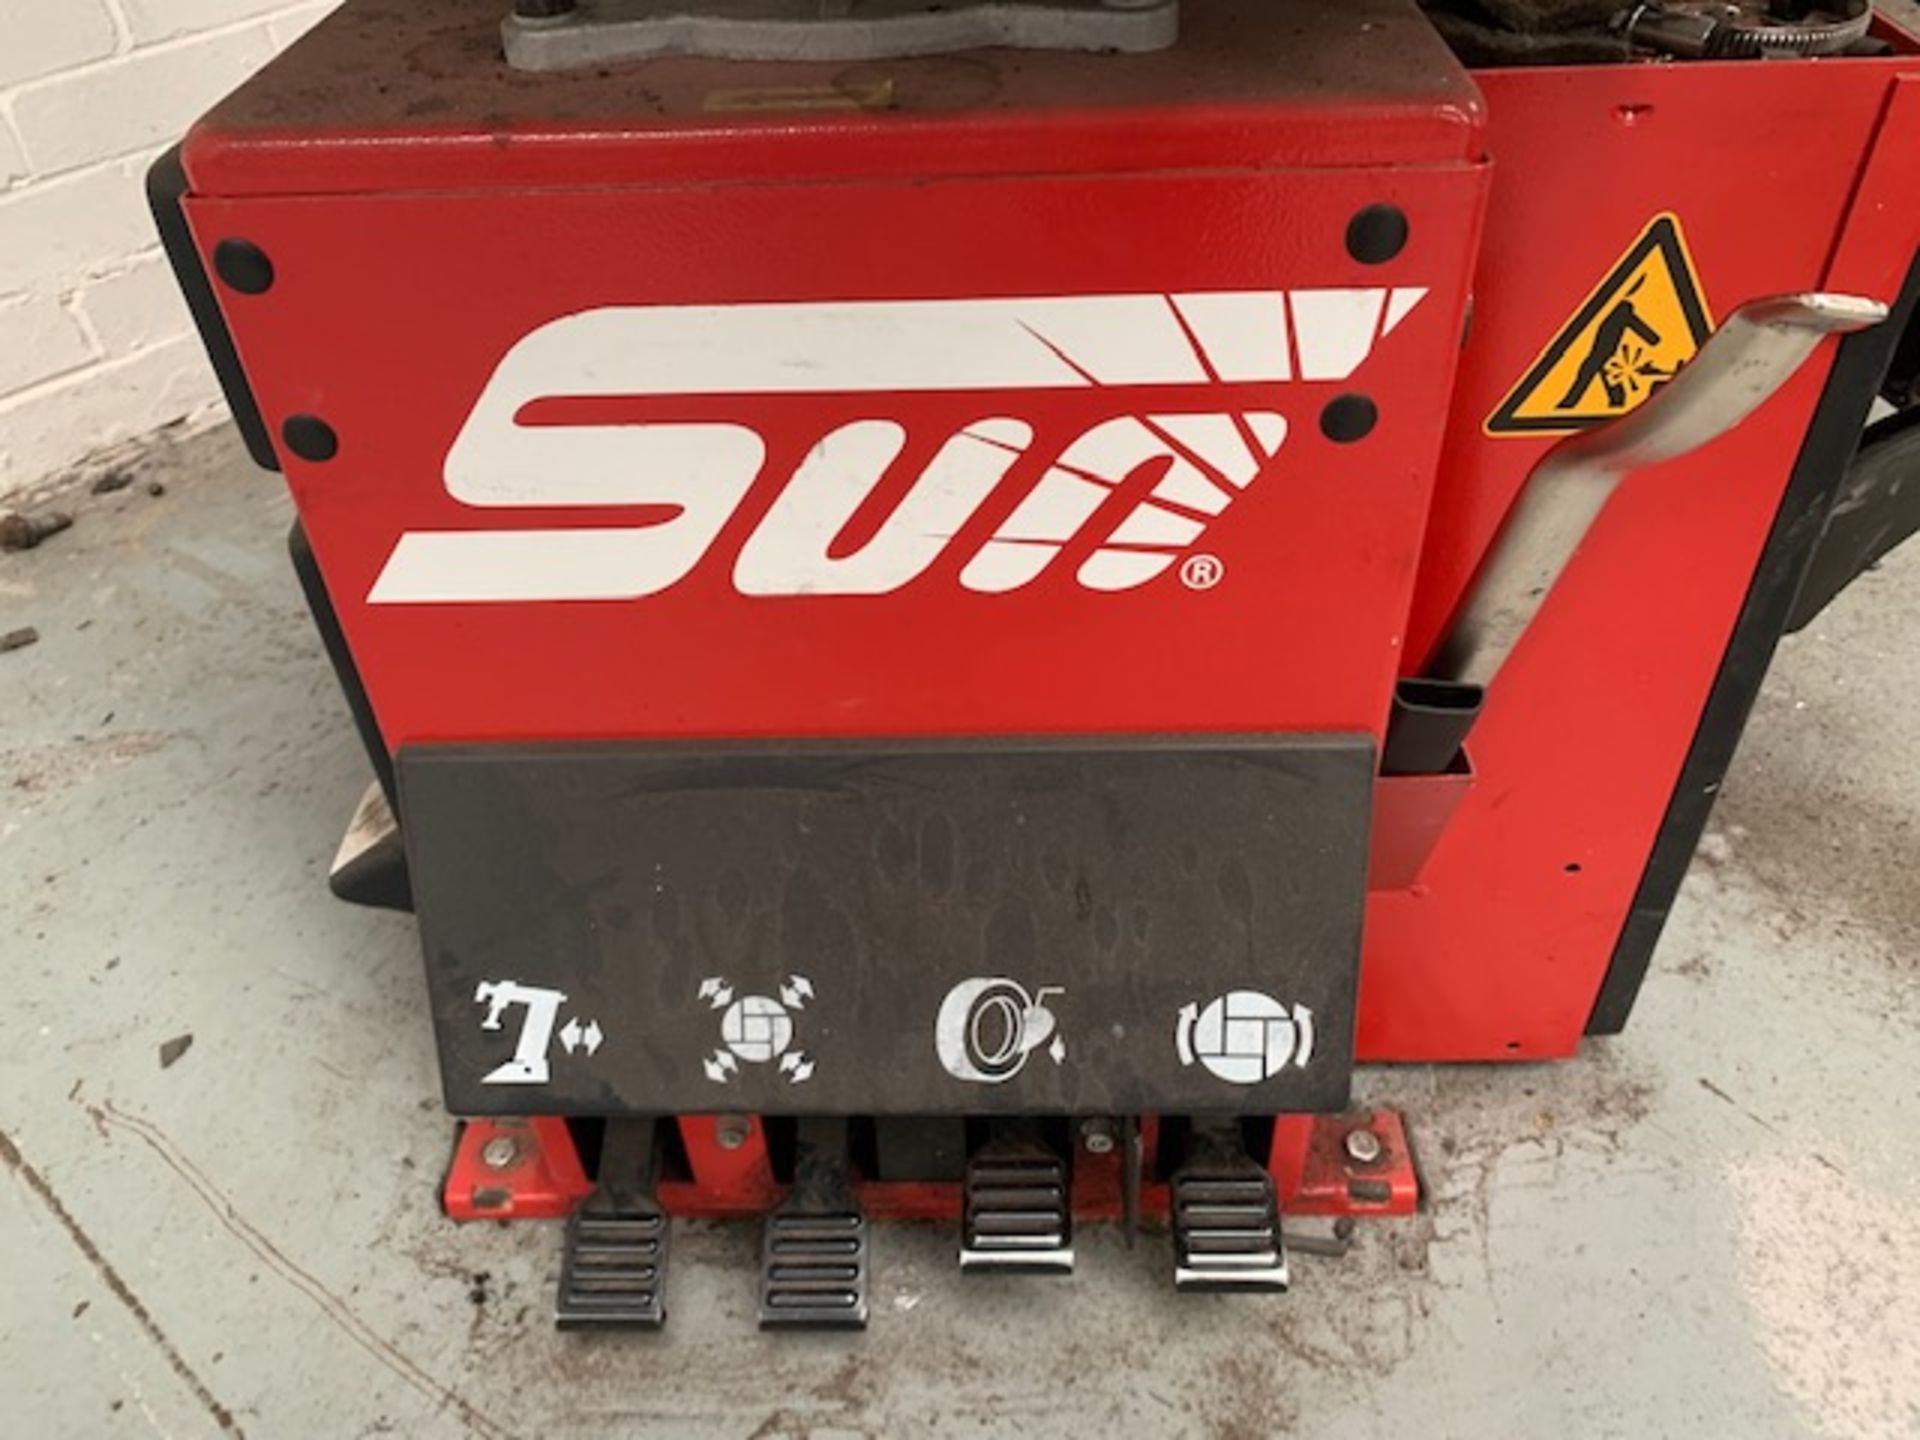 A Snap-On Sun Model STC 5325 Tyre Changer. - Image 2 of 7